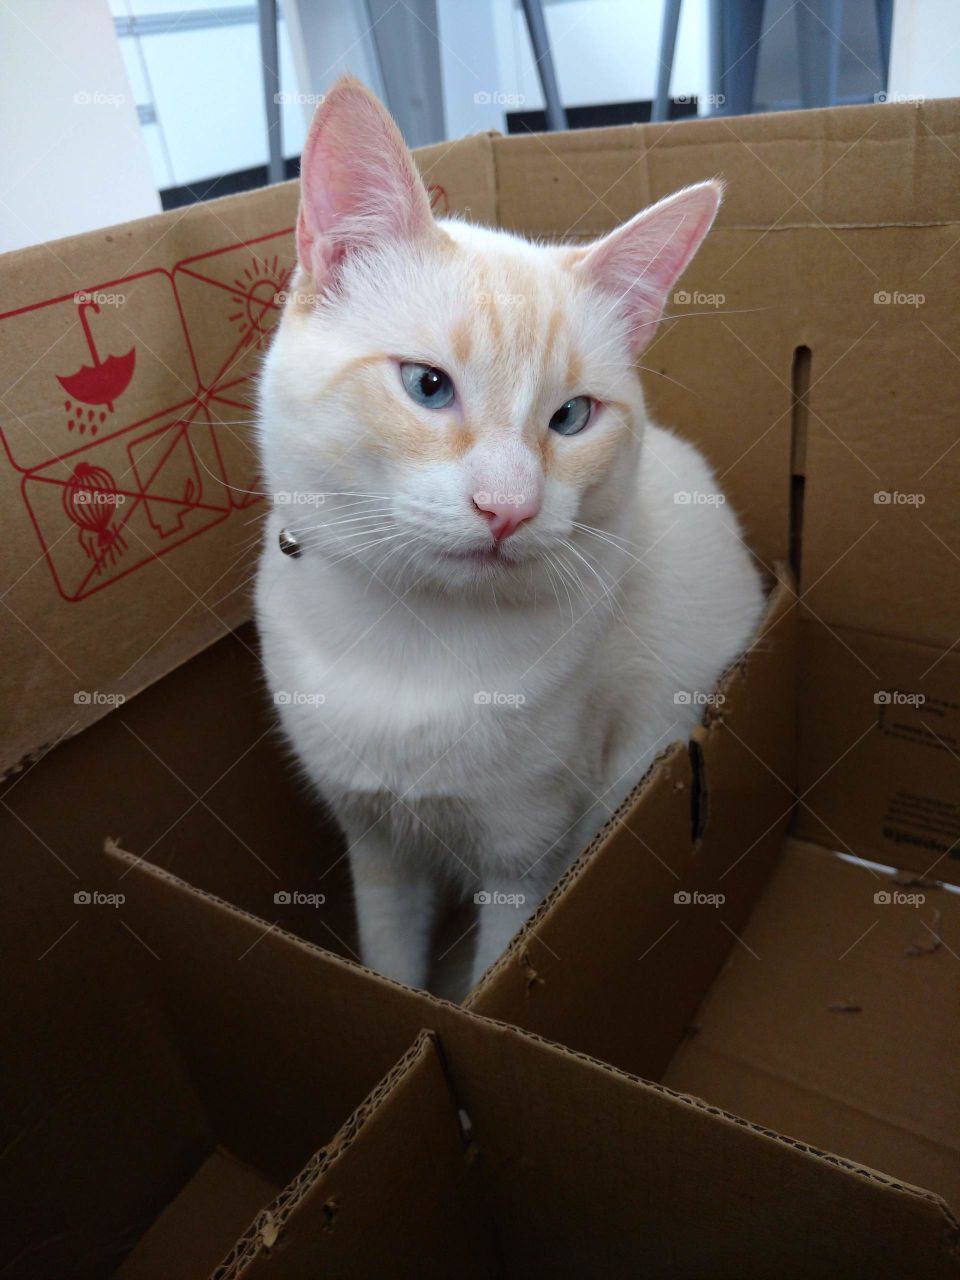 The cat inside the box